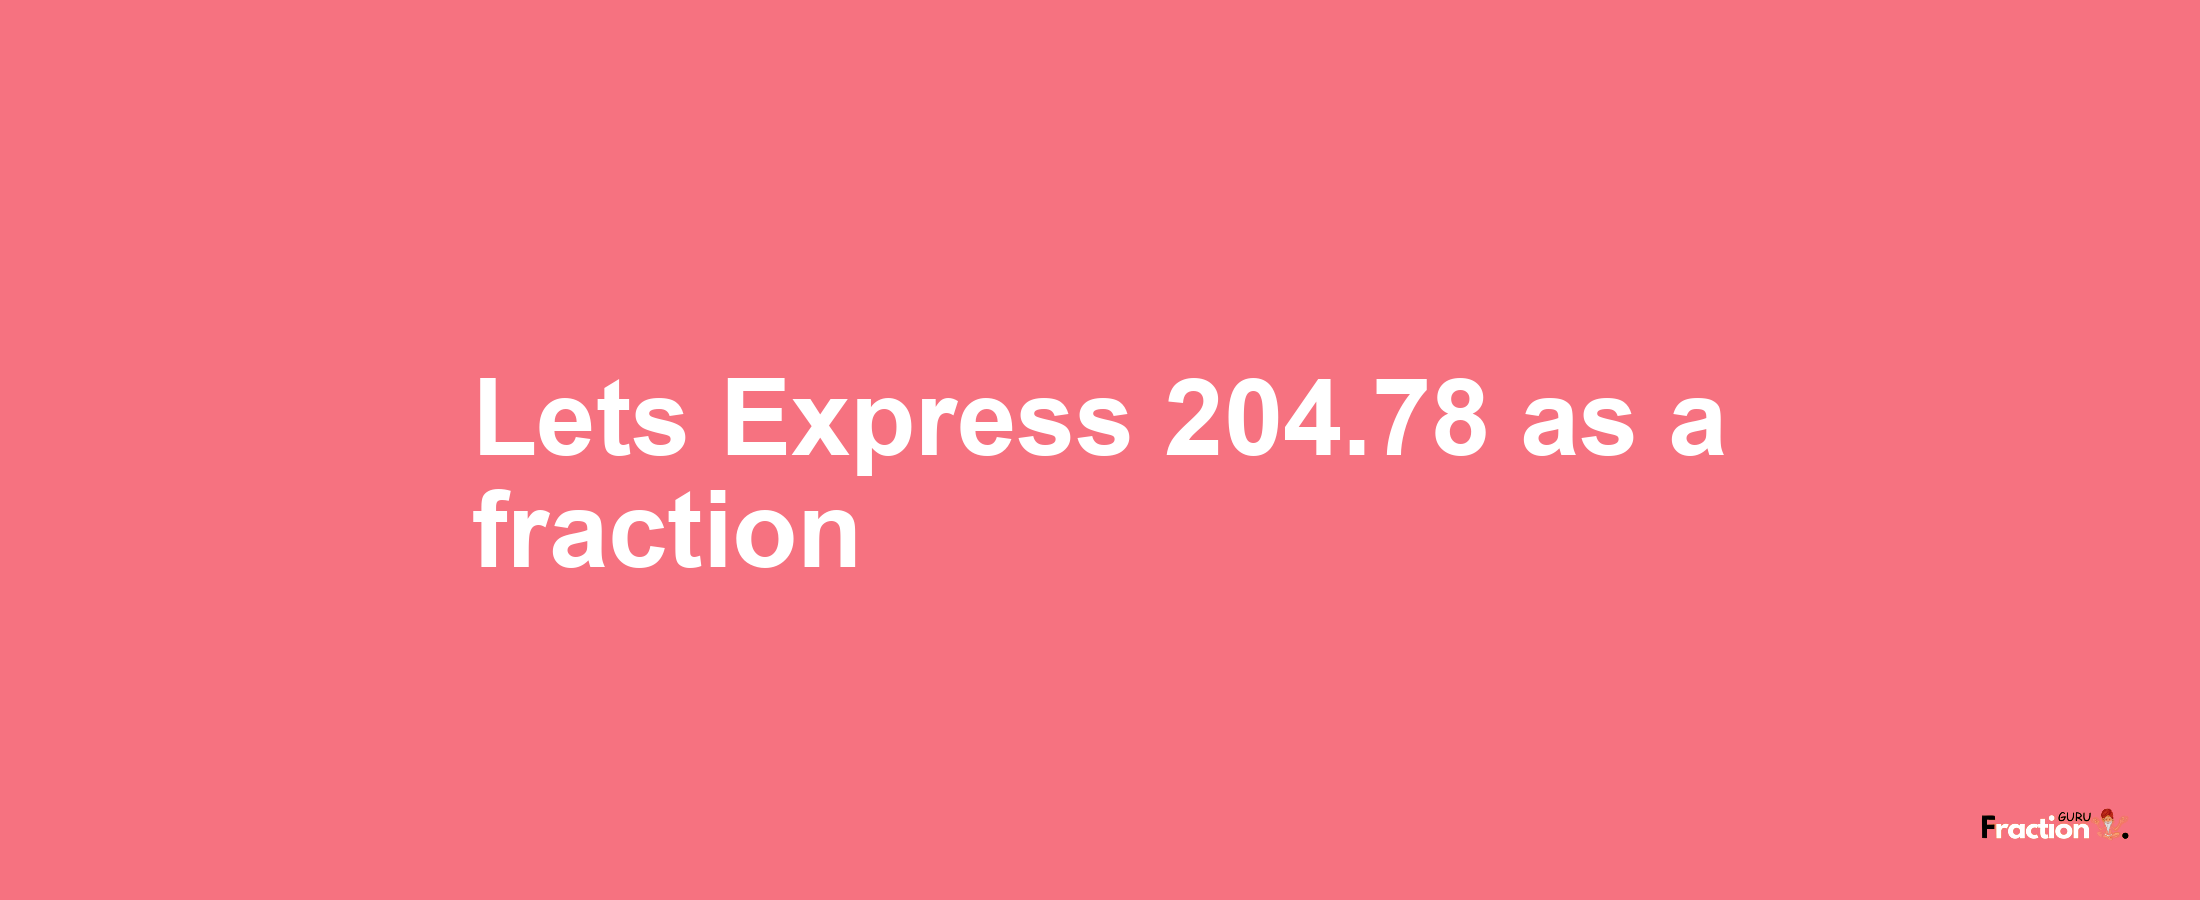 Lets Express 204.78 as afraction